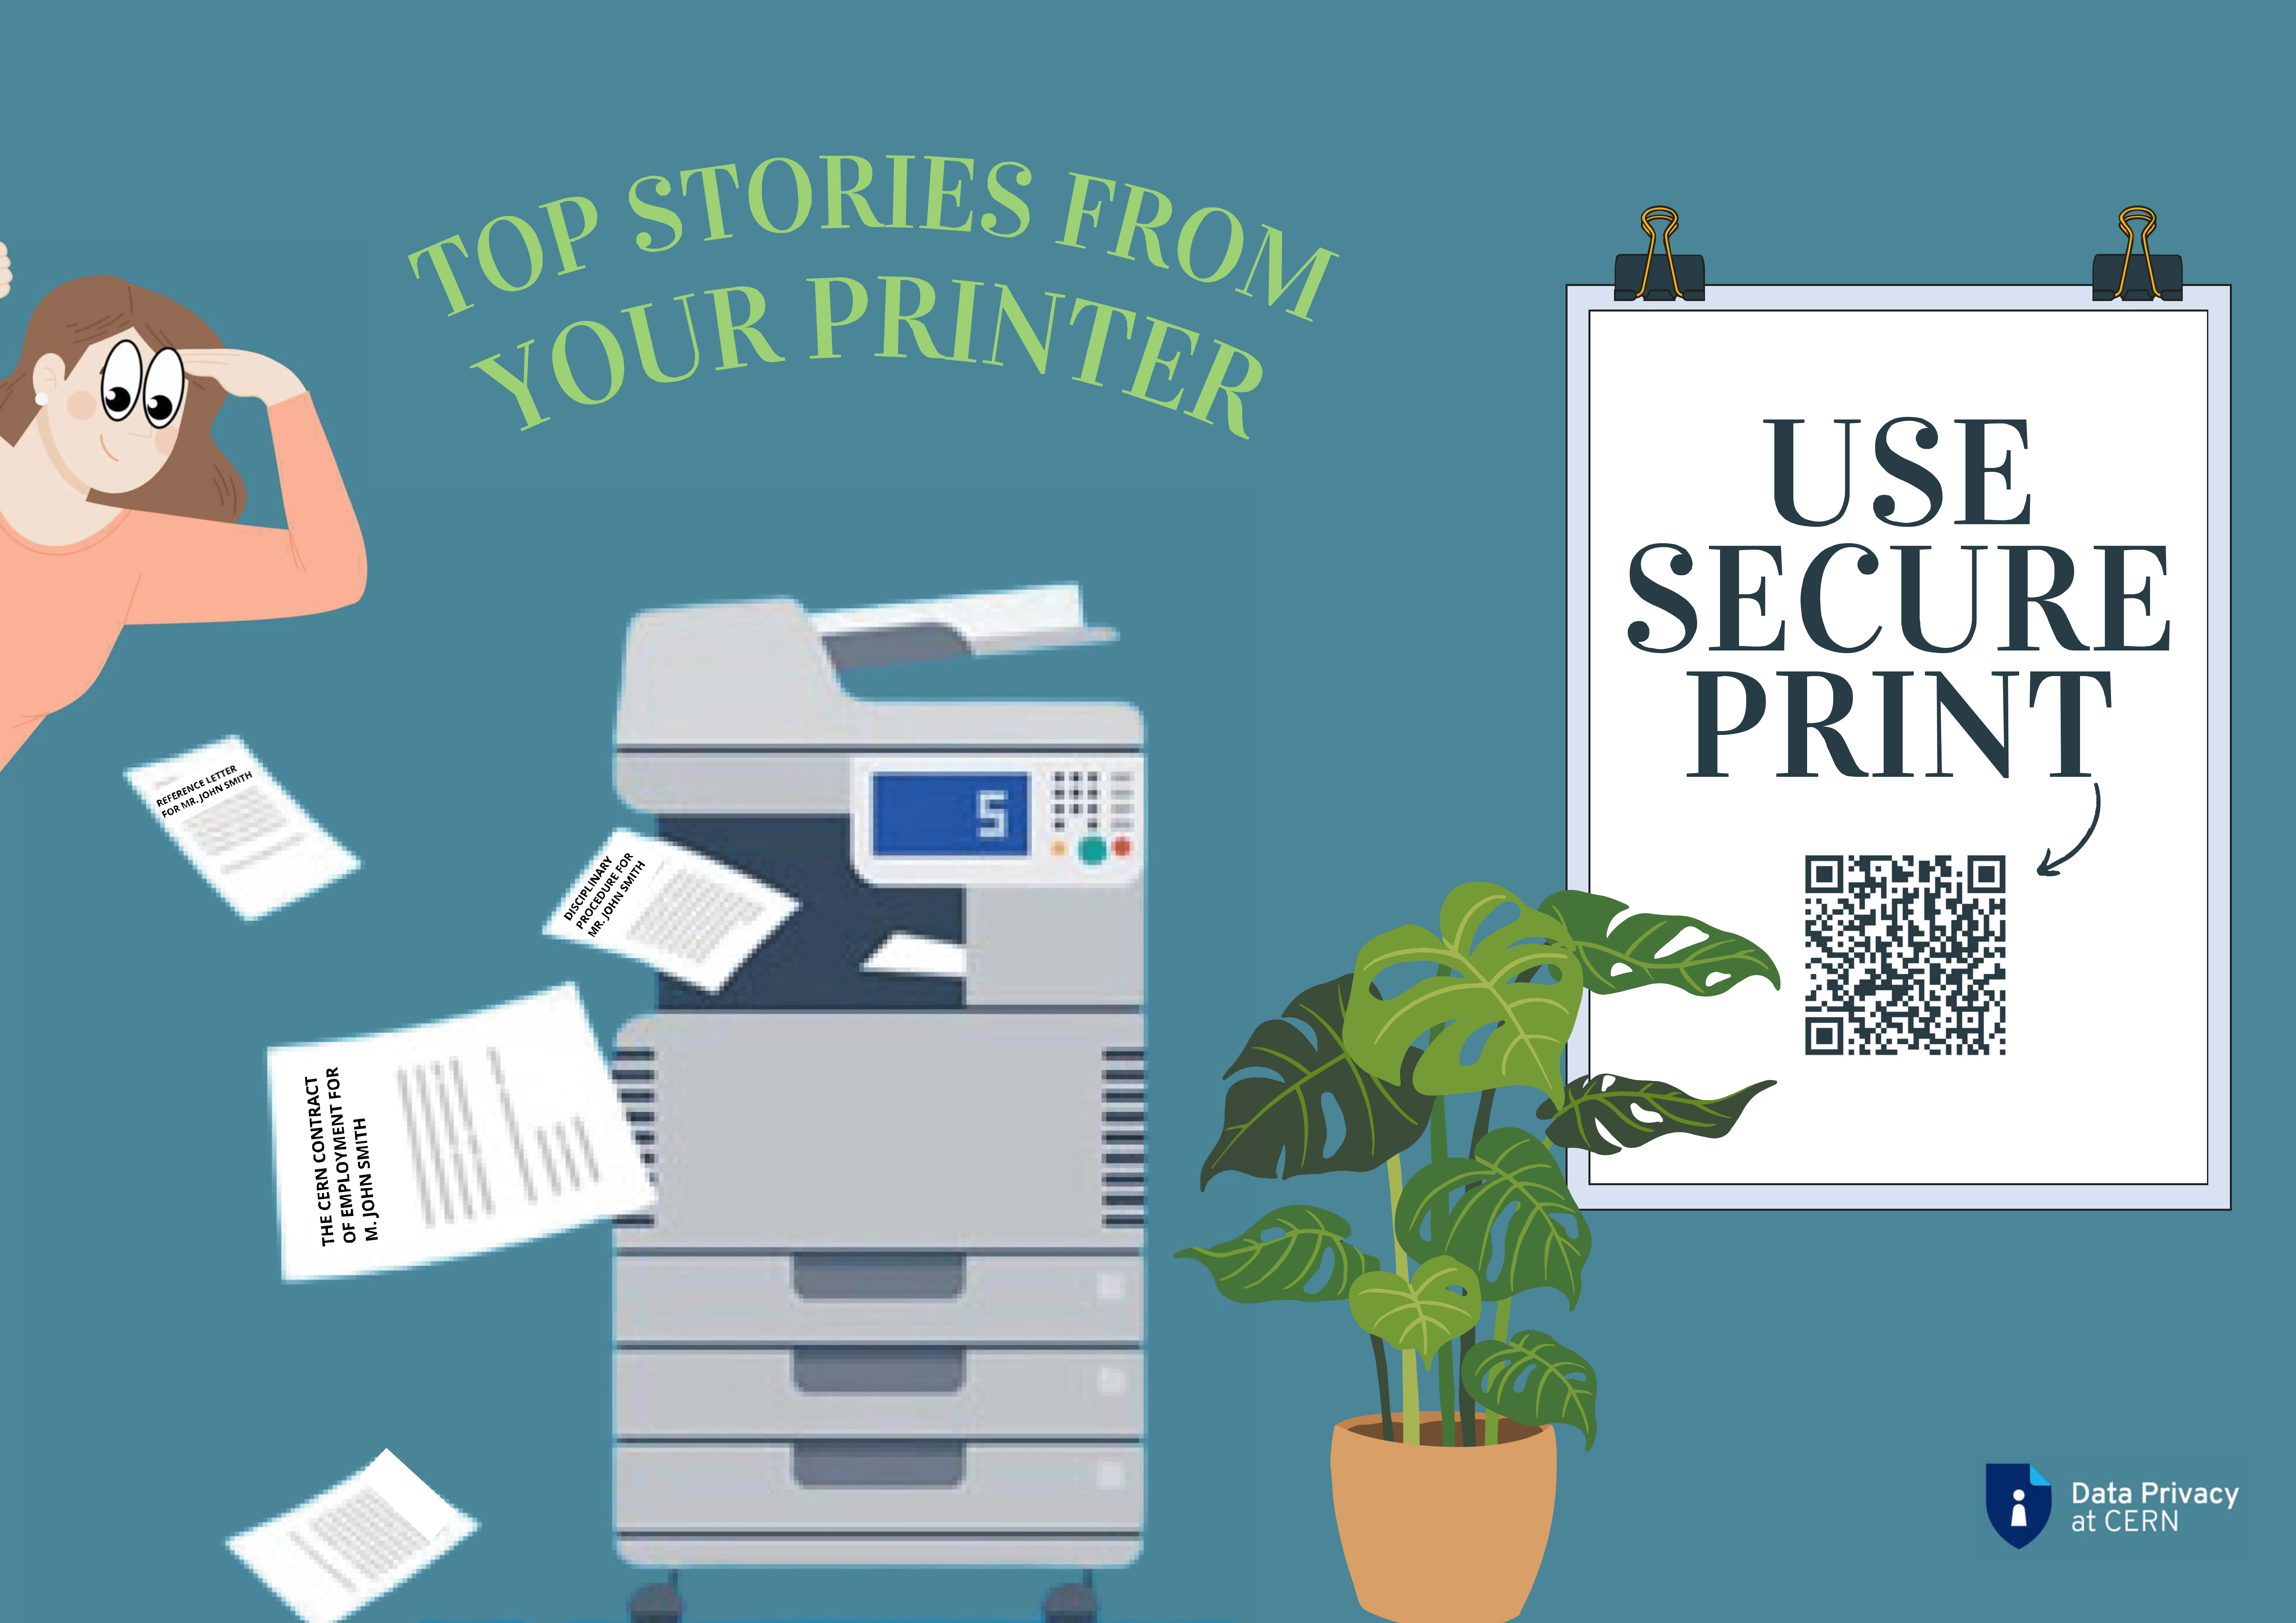 Top Stories from your printer